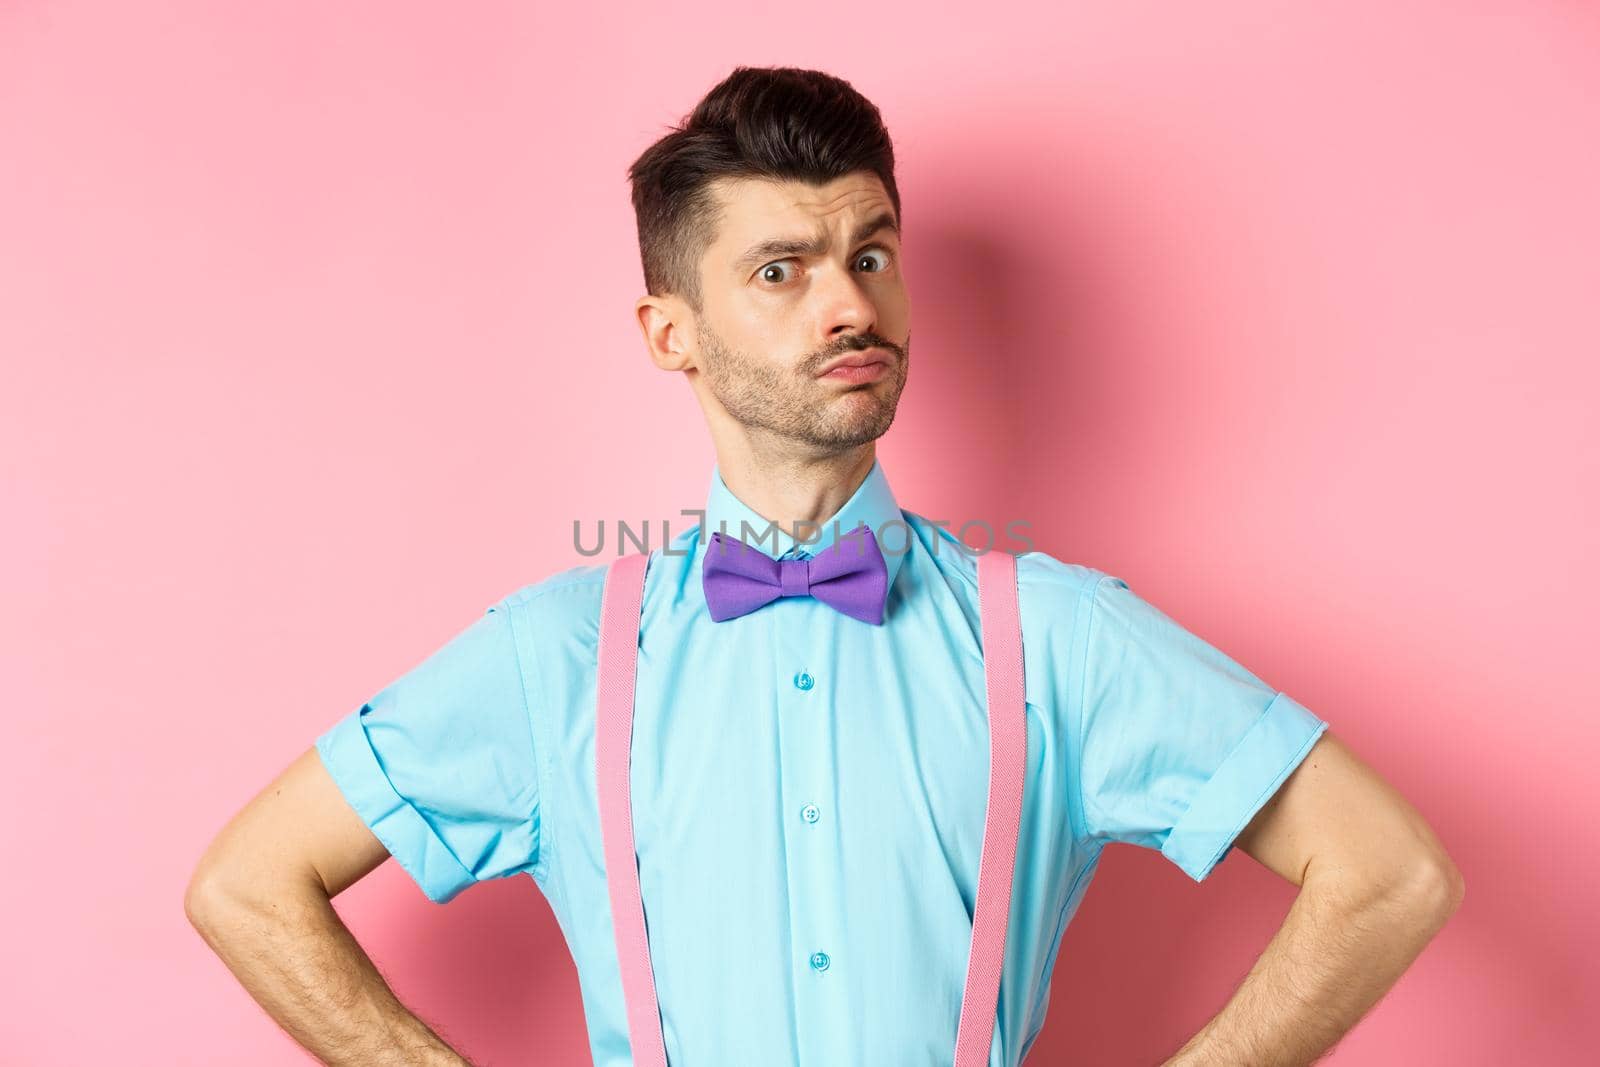 Image of young man with funny moustache and bow-tie standing in confident pose, staring with disbelief and doubts at camera, posing over pink background.